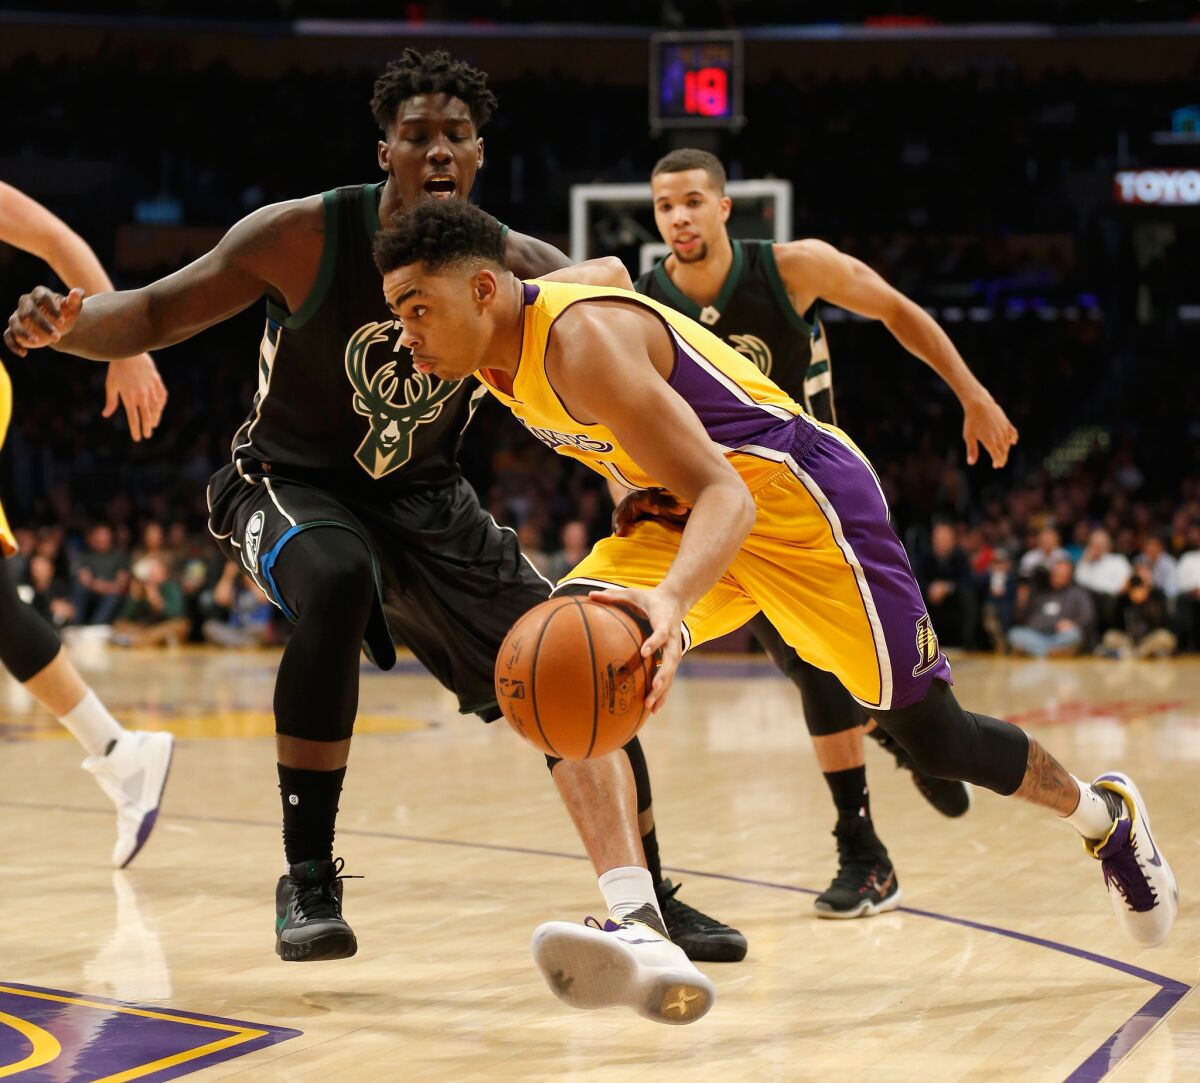 Lakers' D'Angelo Russell dribbles past Milwaukee's Johnny O'Bryant III during the first half of a game at Staples Center on Tuesday.